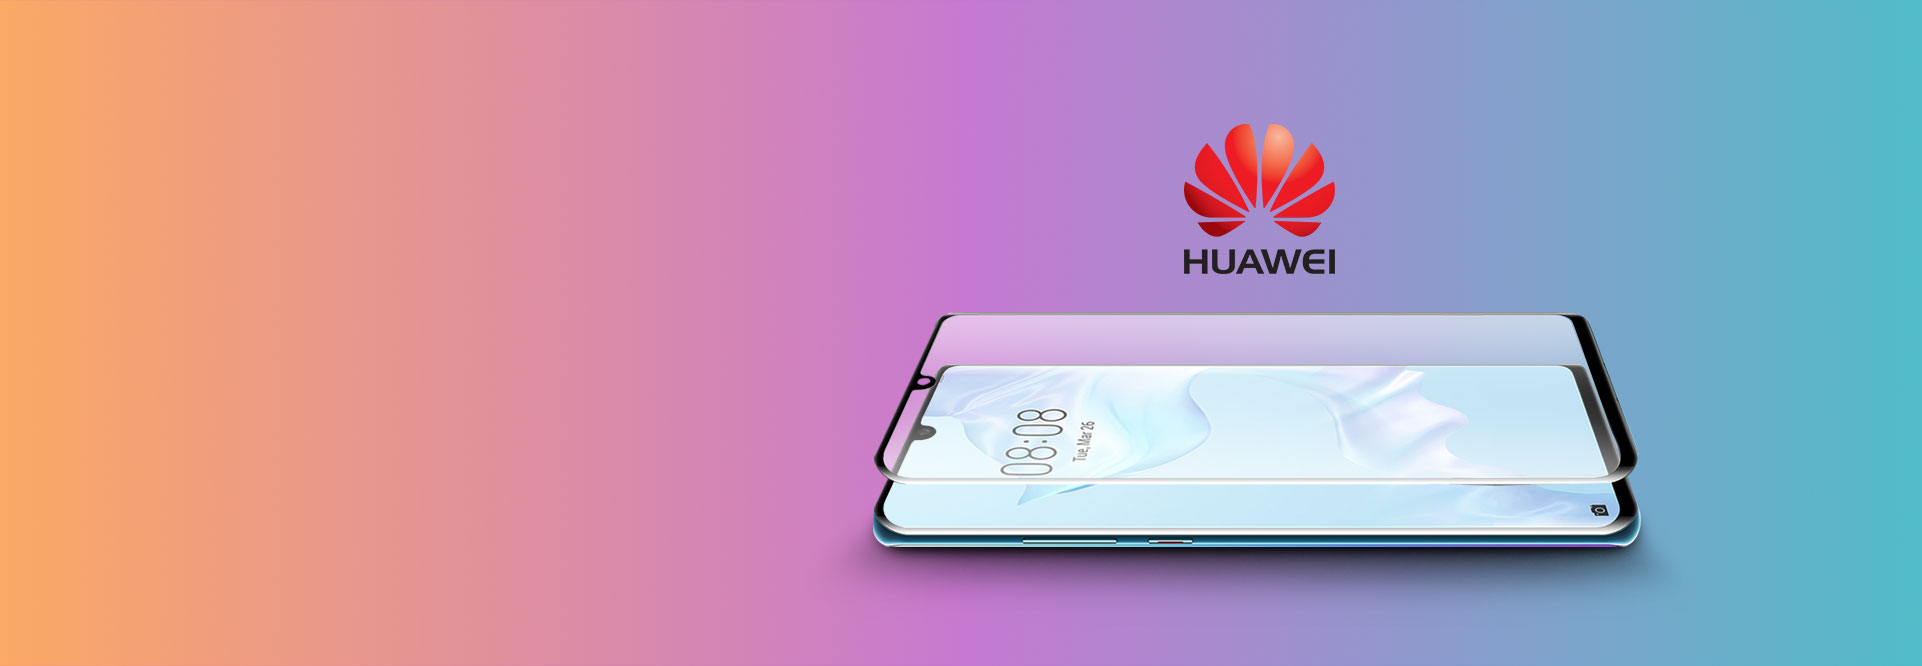 Huawei Announces Free Service Days for South African Customers